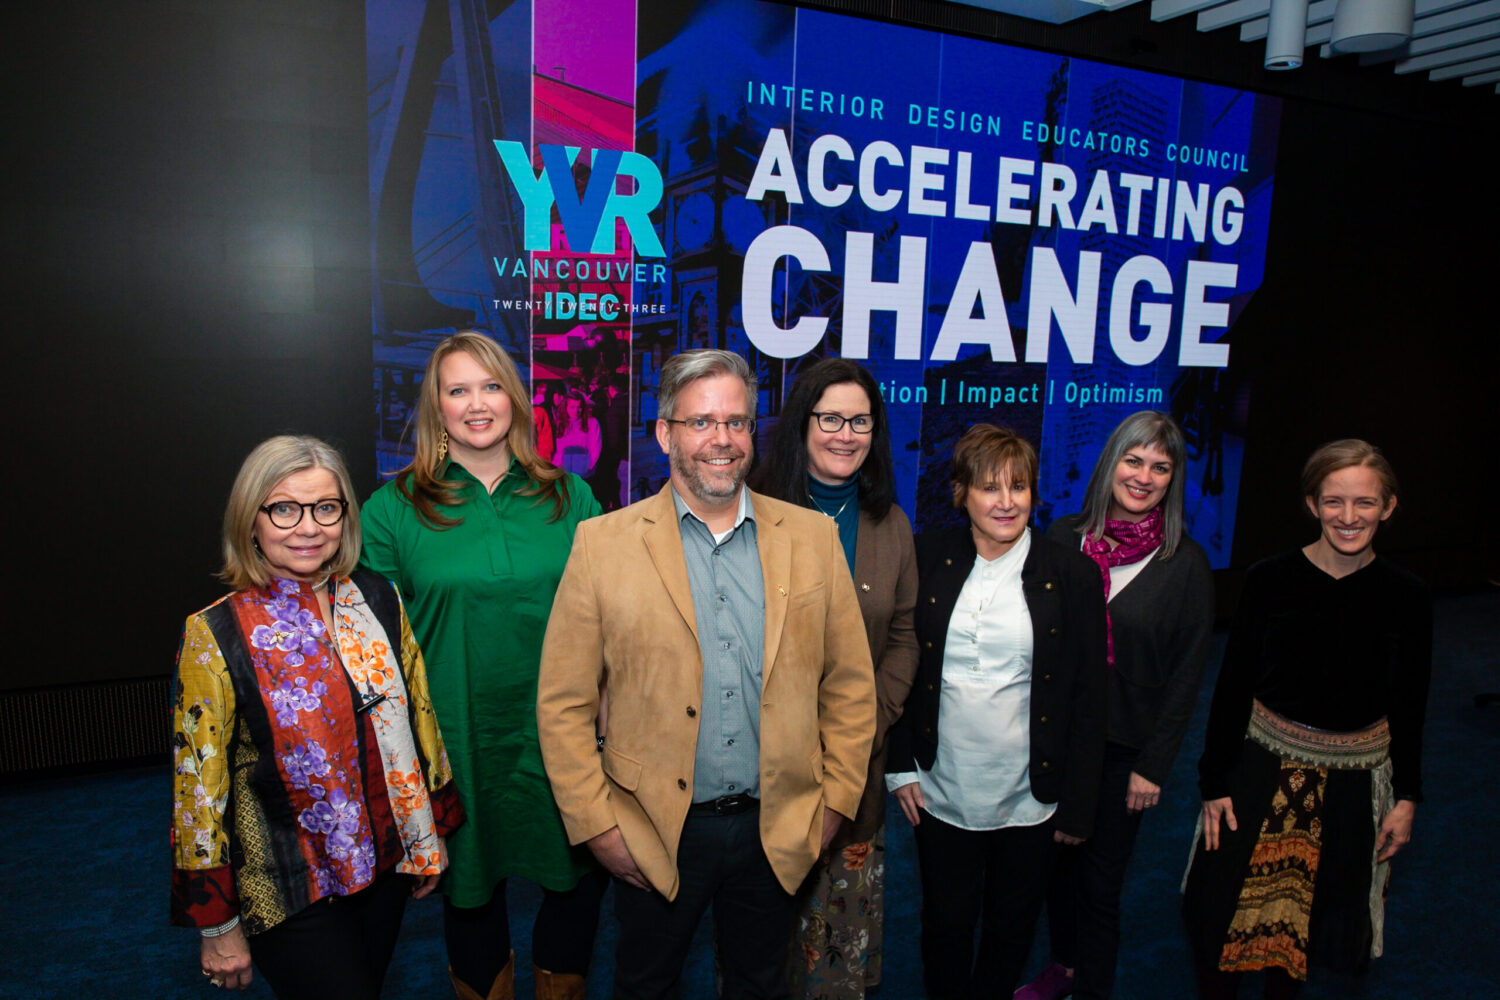 IDEC board members standing in front of Accelerating Change conference banner.